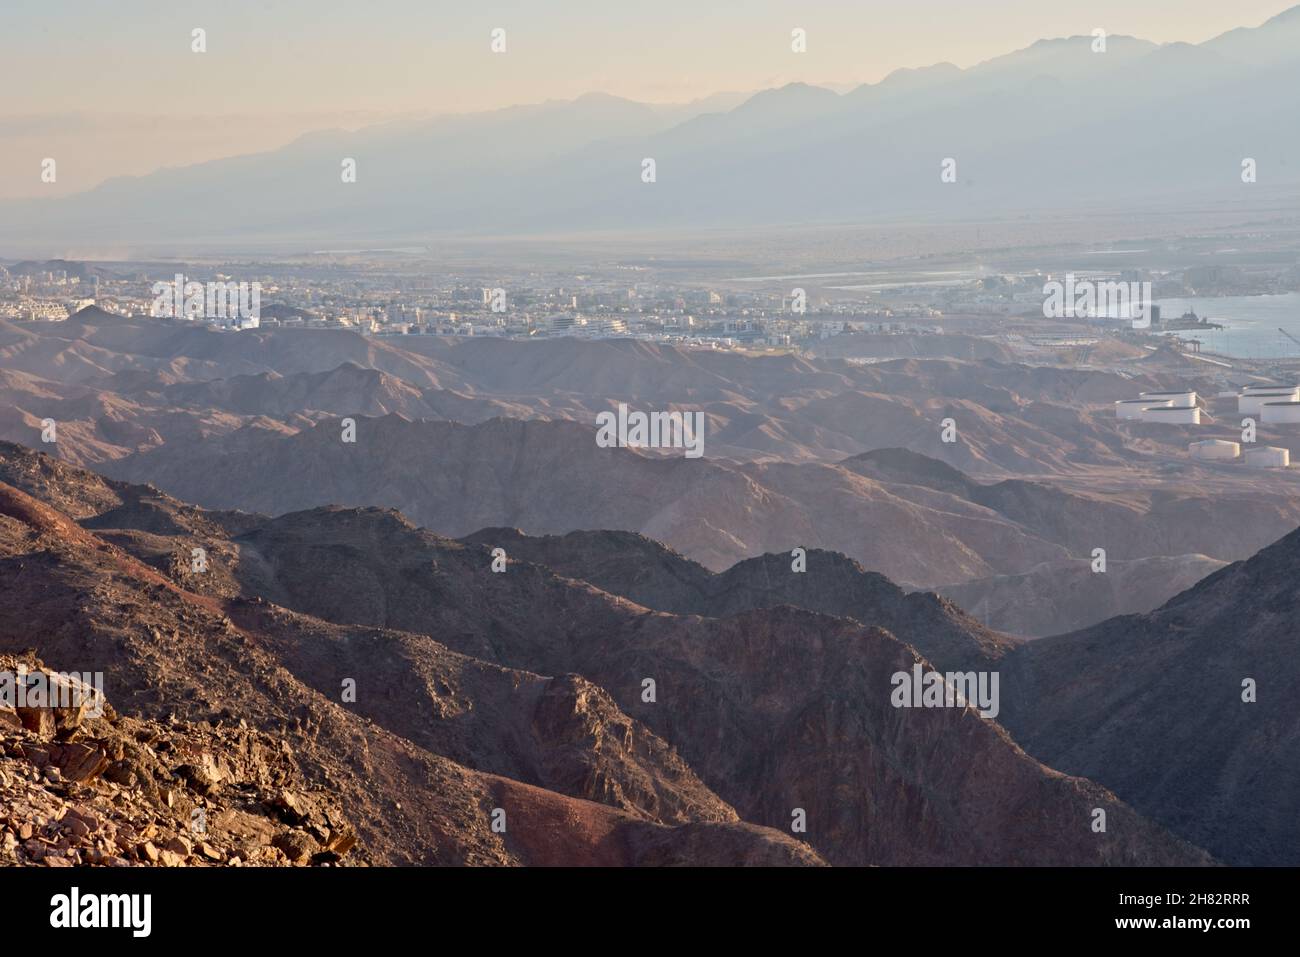 Shlomo Salomon mountain. View of the Eilat mountains. Against the background of the Aqaba Mountains, Jordan. The mountains, the city and the port. Red Sea. Eilat Israel. High quality photo Stock Photo